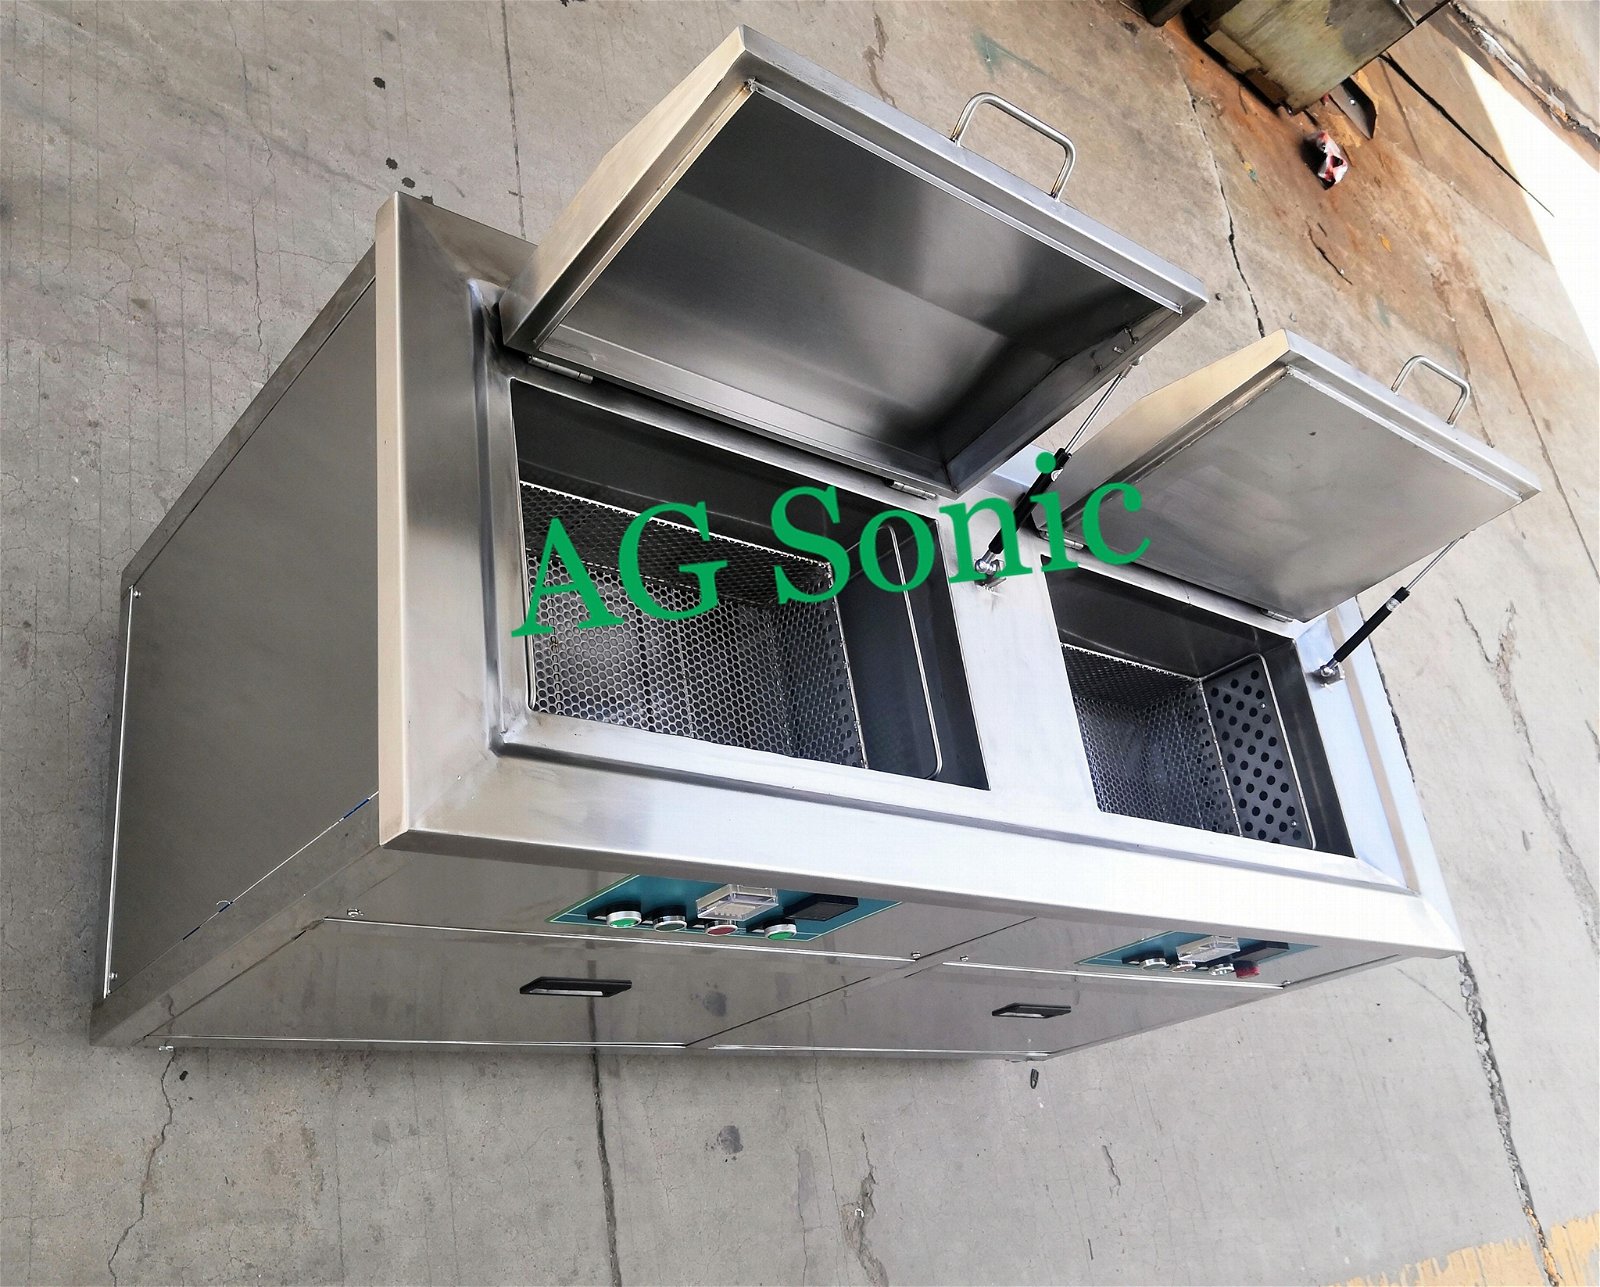 Mold and die casting parts ultrasoinc cleaner with dryer 2